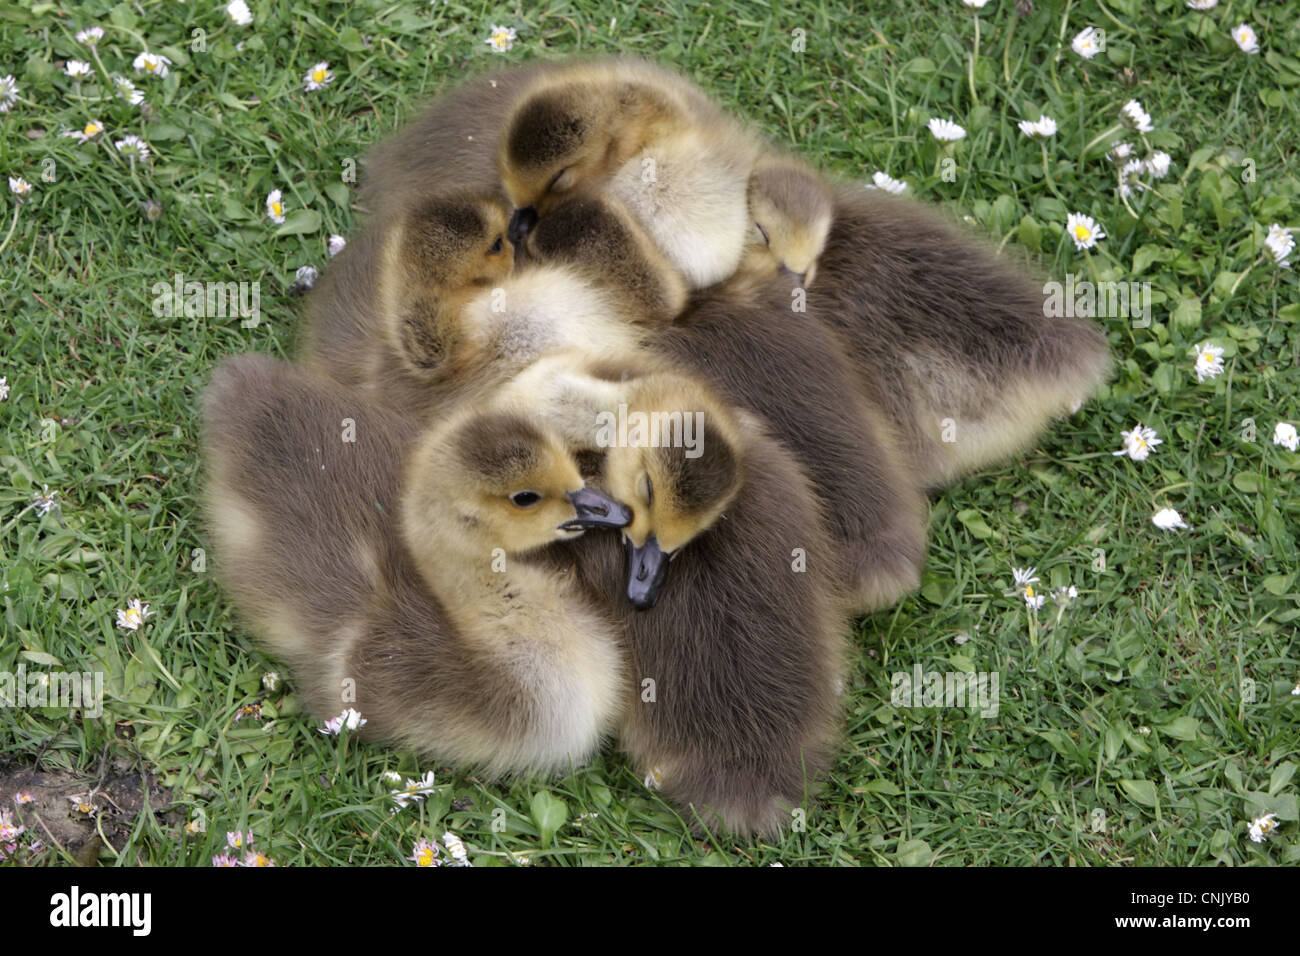 Canada Goose (Branta canadensis) introduced species, goslings, sleeping huddled together, London, England, may Stock Photo